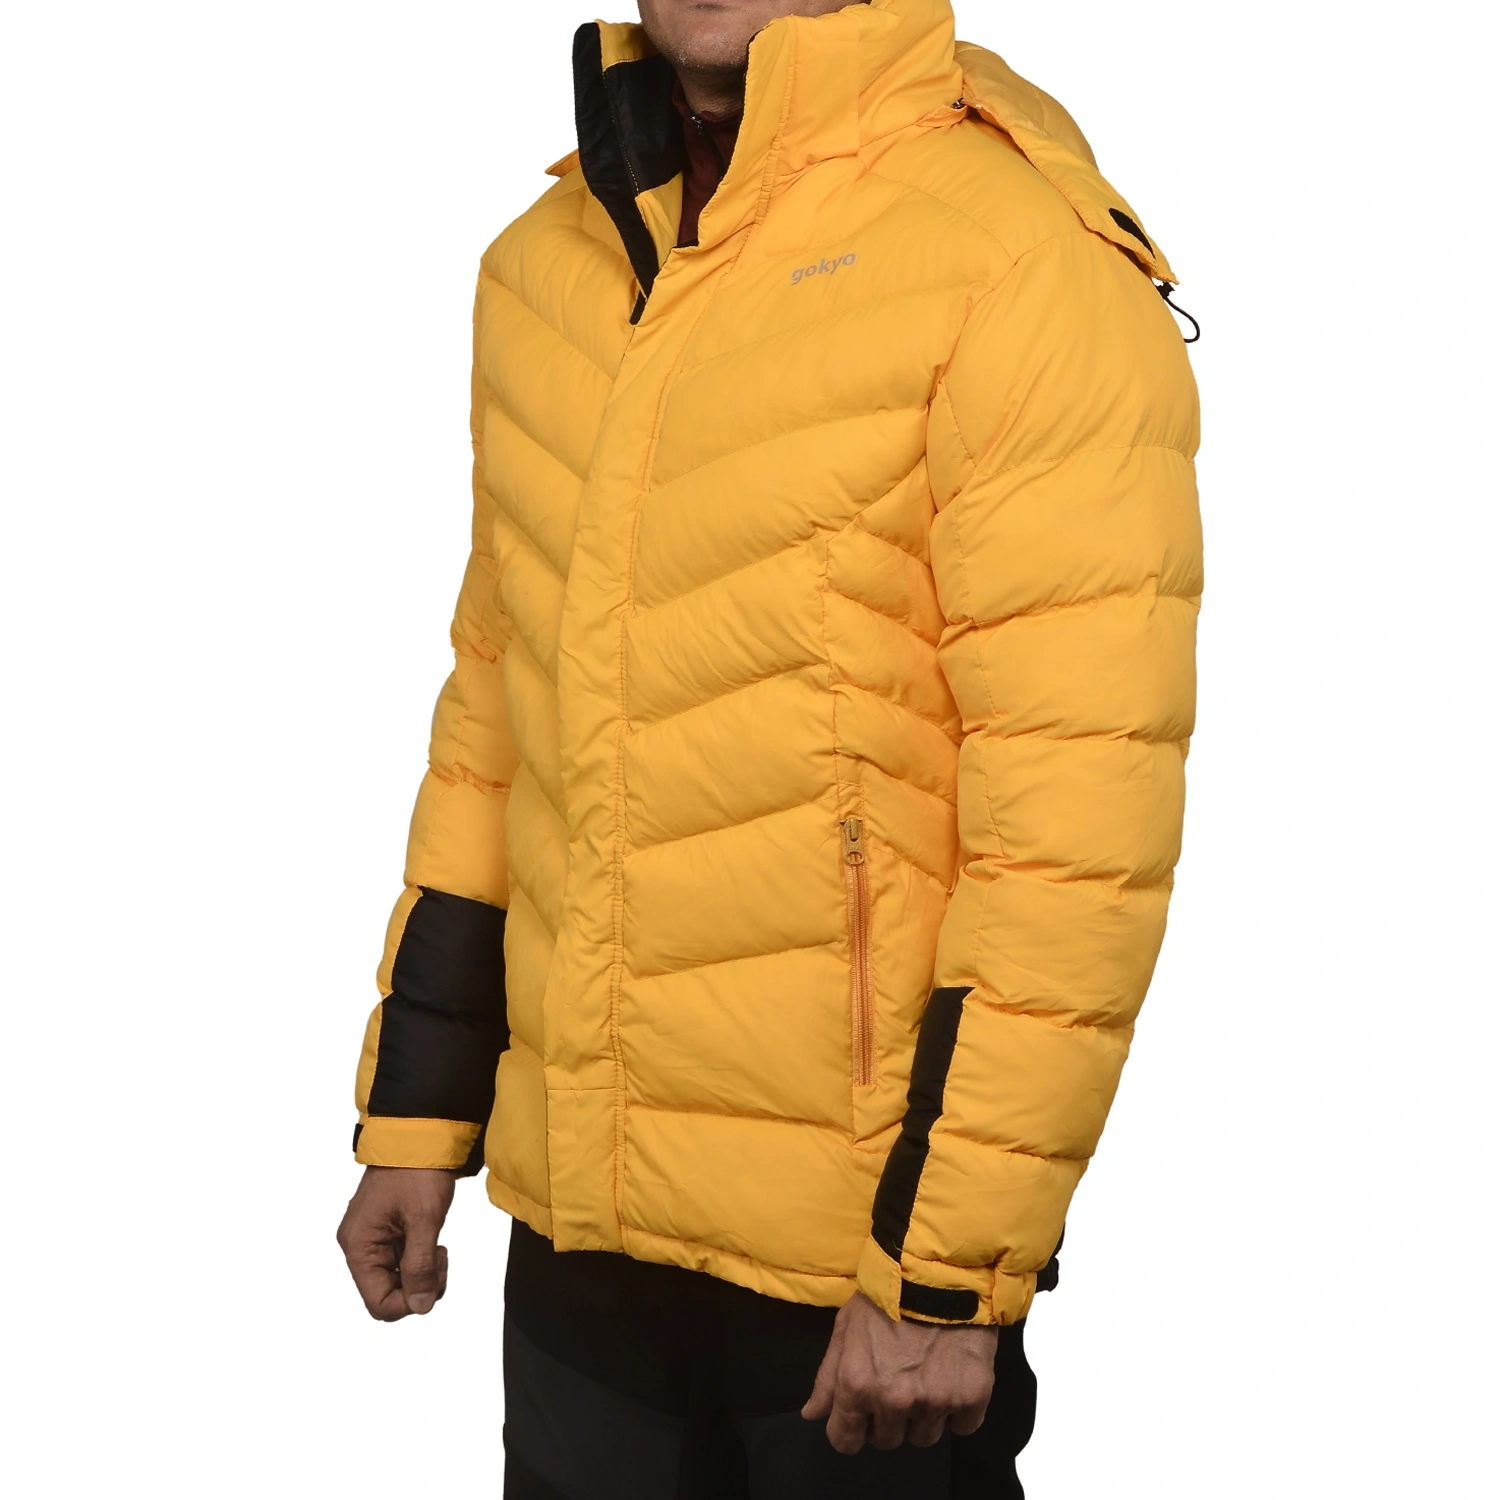 K2 Survivor Down Jacket for Men: Stylized Functionality for Extreme Cold Weather Expeditions (Up to -20°C)-Yellow-XS-2